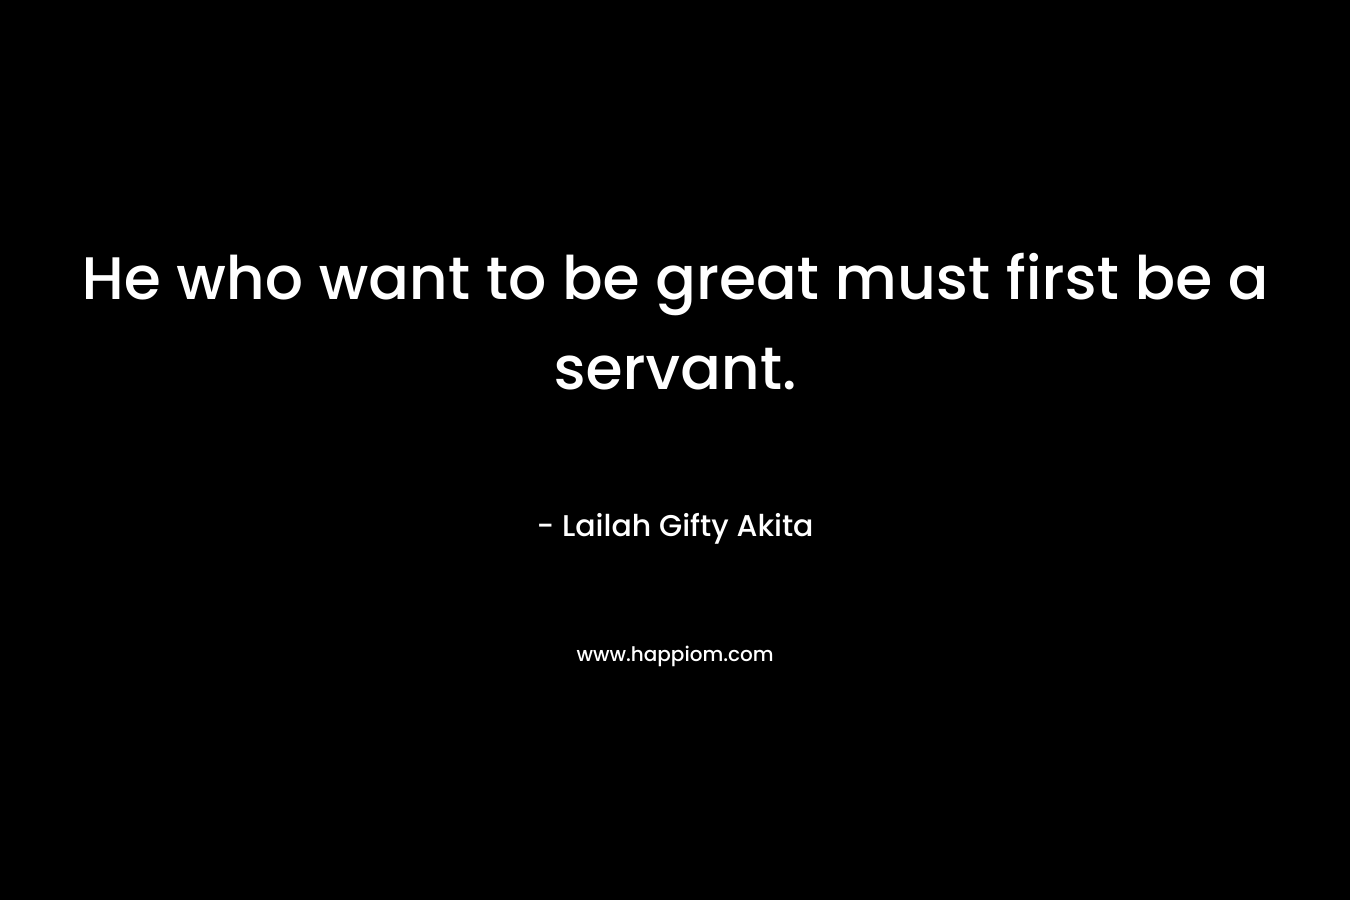 He who want to be great must first be a servant.